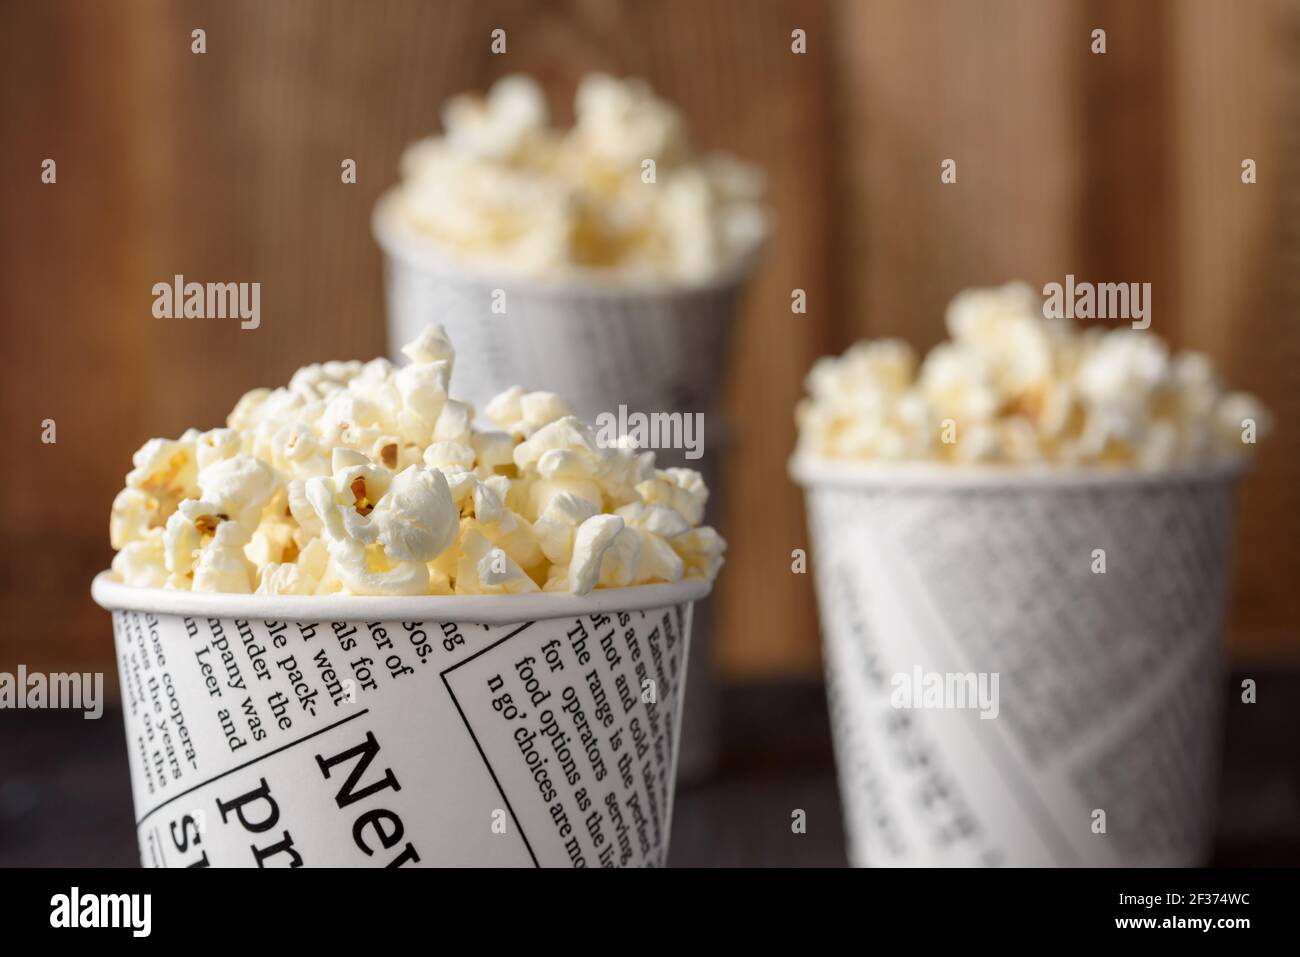 A bucket of popcorn, top-view, warm colors, light brown wooden background, daylight macro close-up Stock Photo